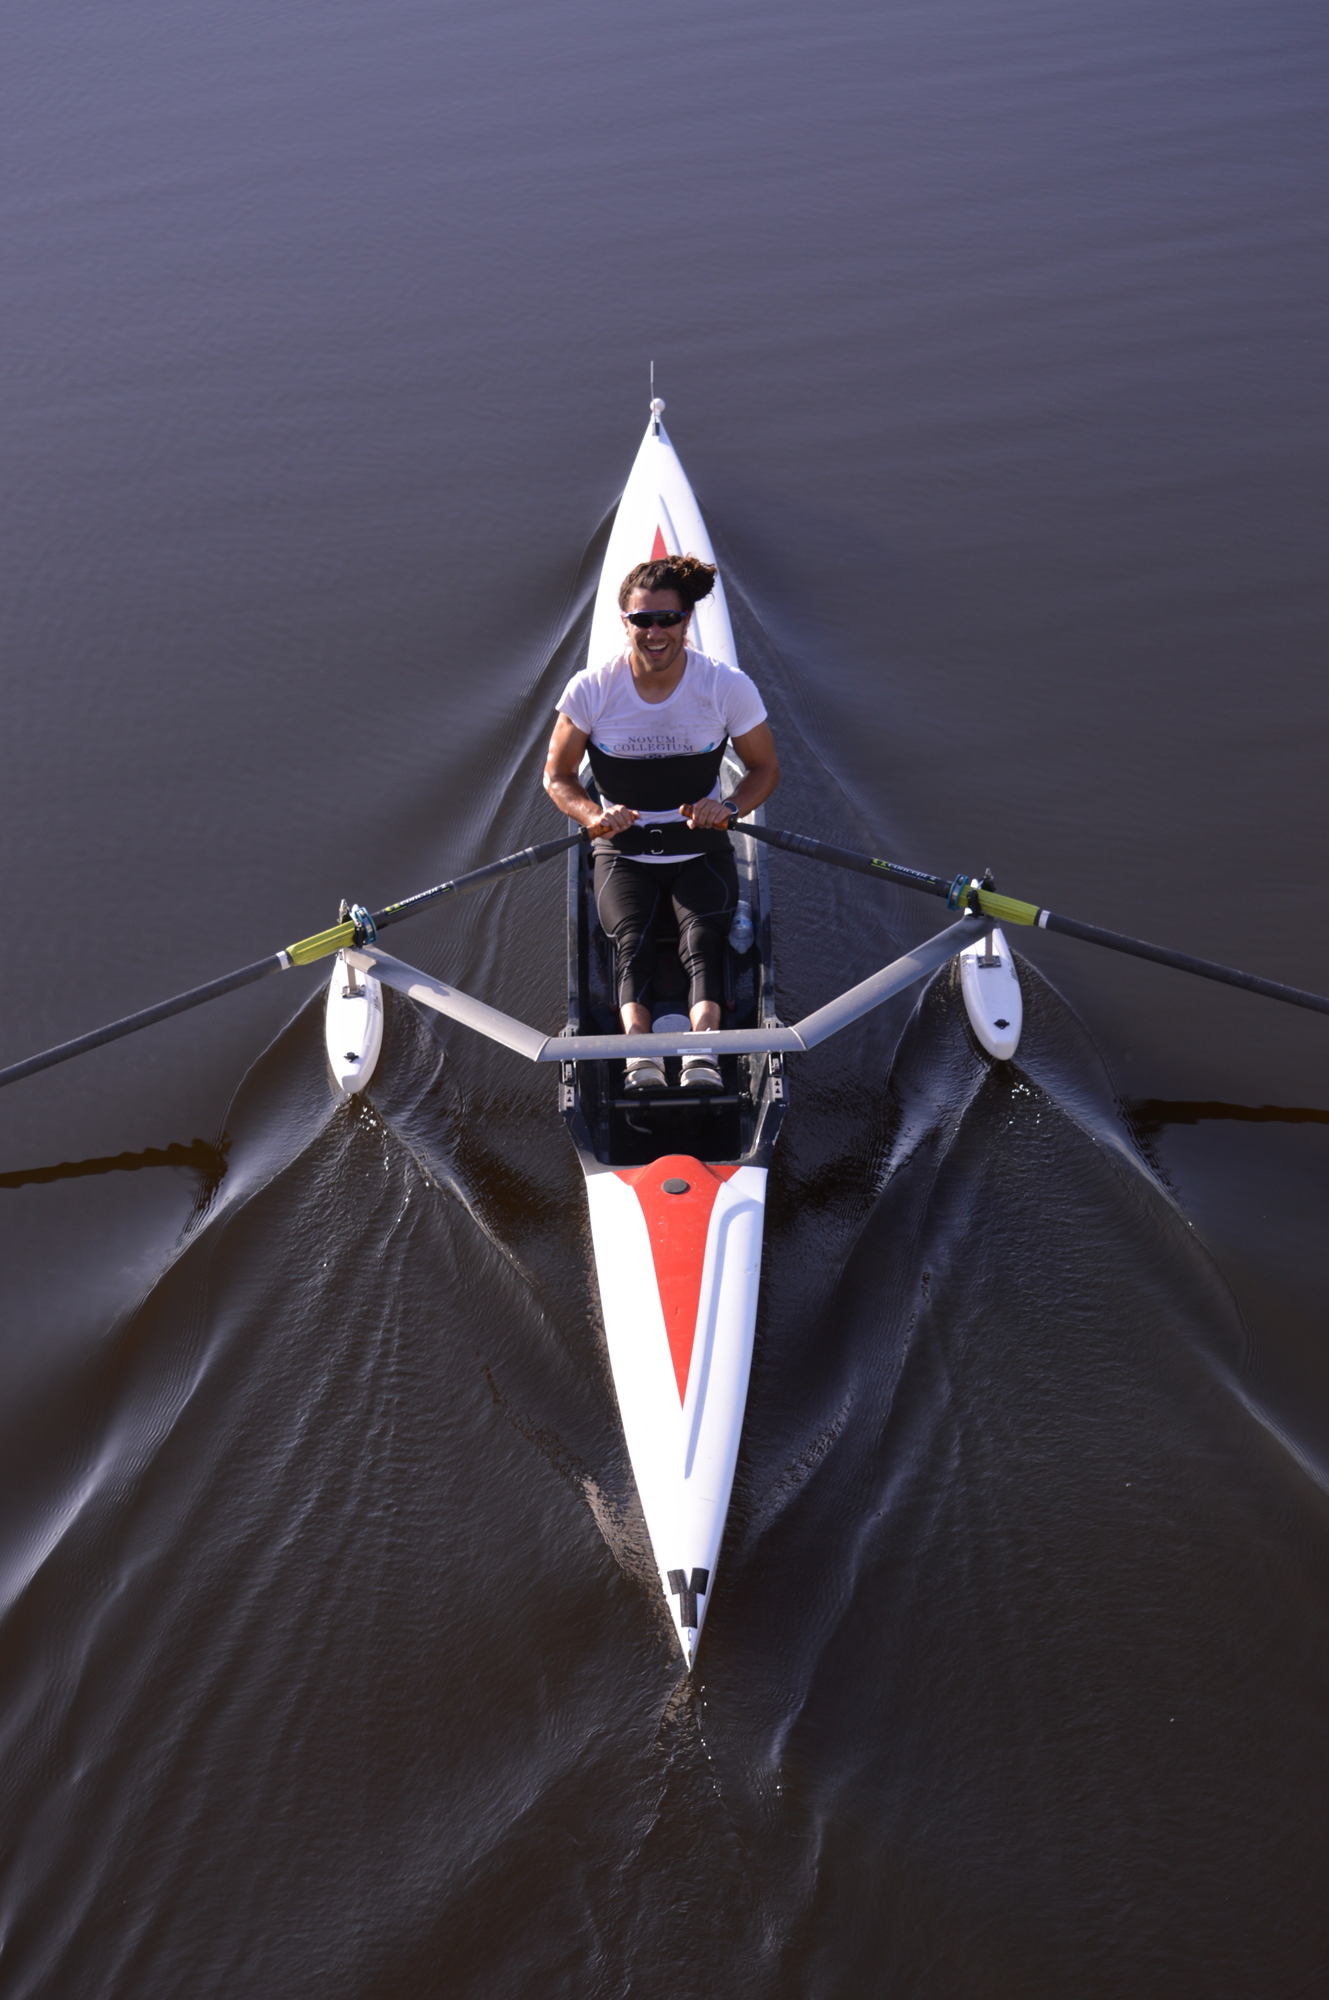 Elliot Vasquez rows back to shore after finishing in first place in the PR1 Men's Masters 1x Final (8:11.99) at the 2022 USRowing Masters National Championships. (Photo courtesy of Nathan Benderson Park.)